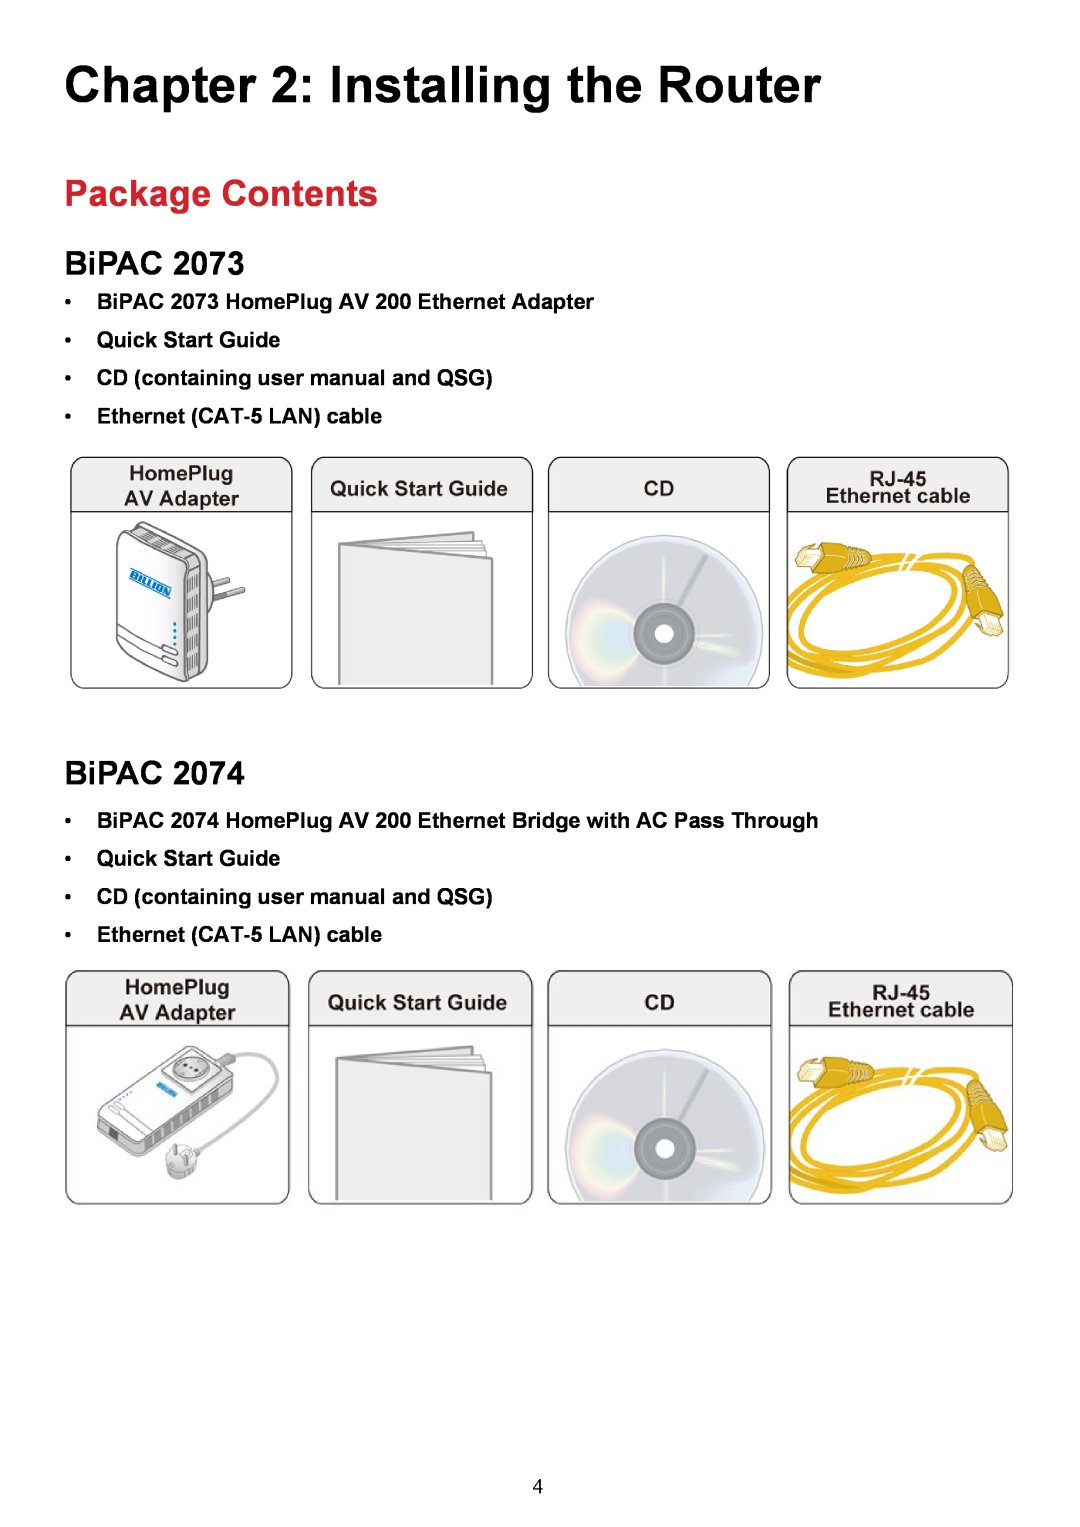 Billion Electric Company 2073 user manual Installing the Router, Package Contents, BiPAC, Ethernet CAT-5 LAN cable 